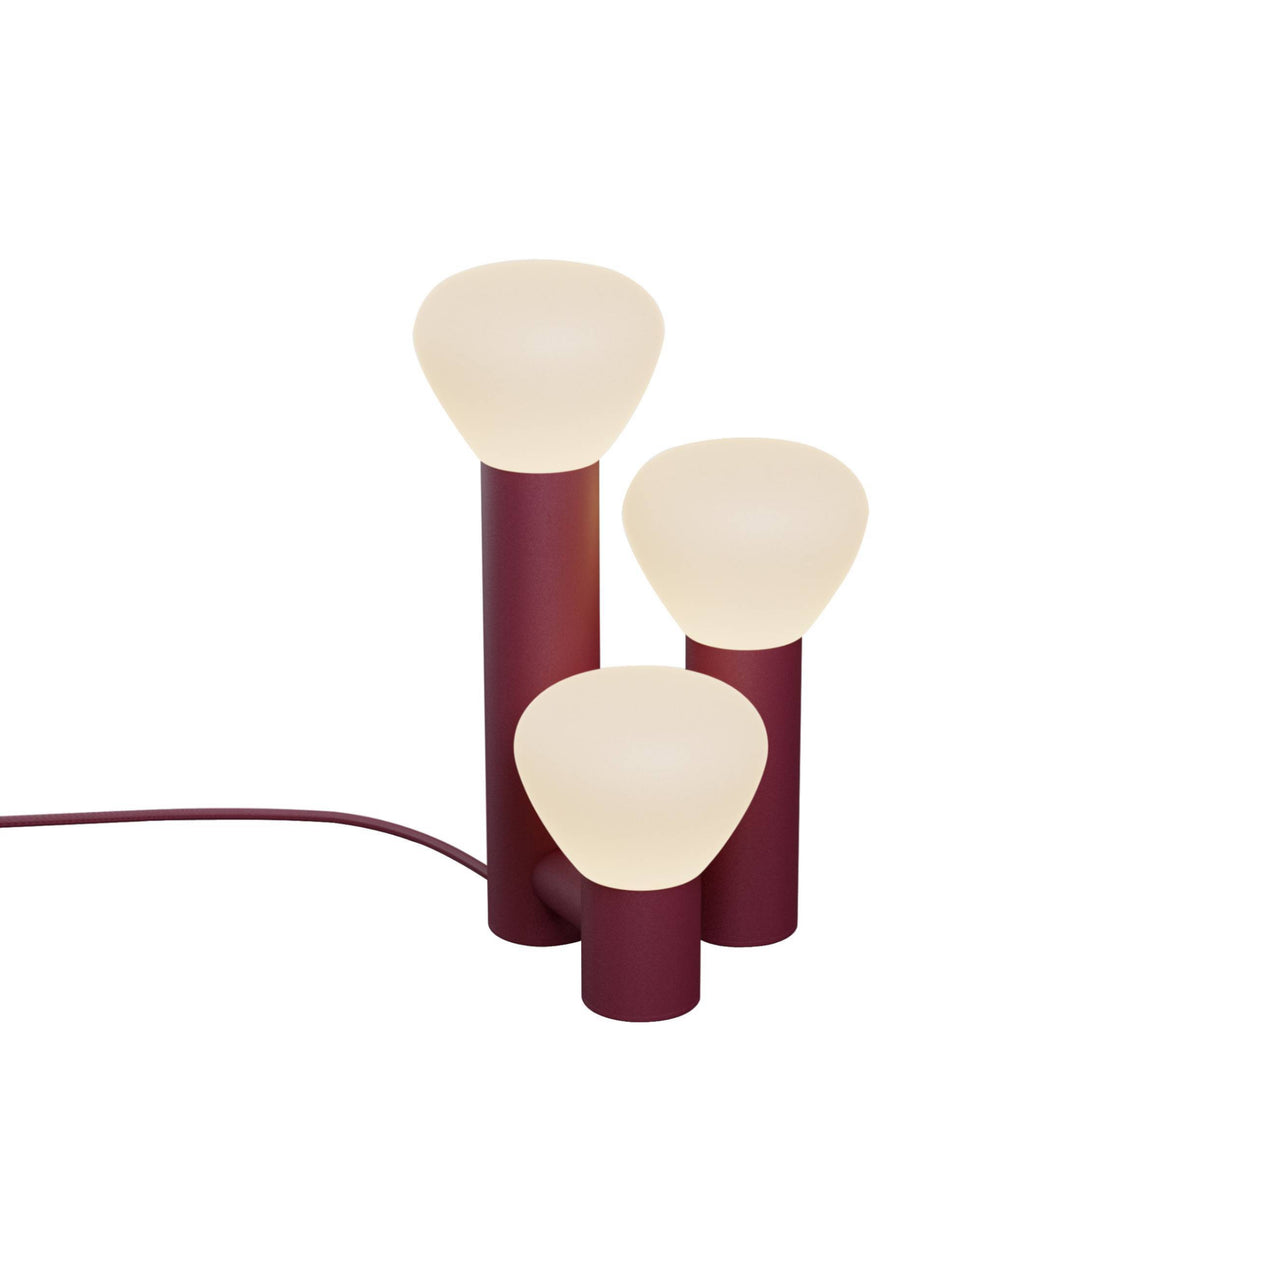 Parc 06 Table Lamp: Footswitch + Burgundy + Burgundy